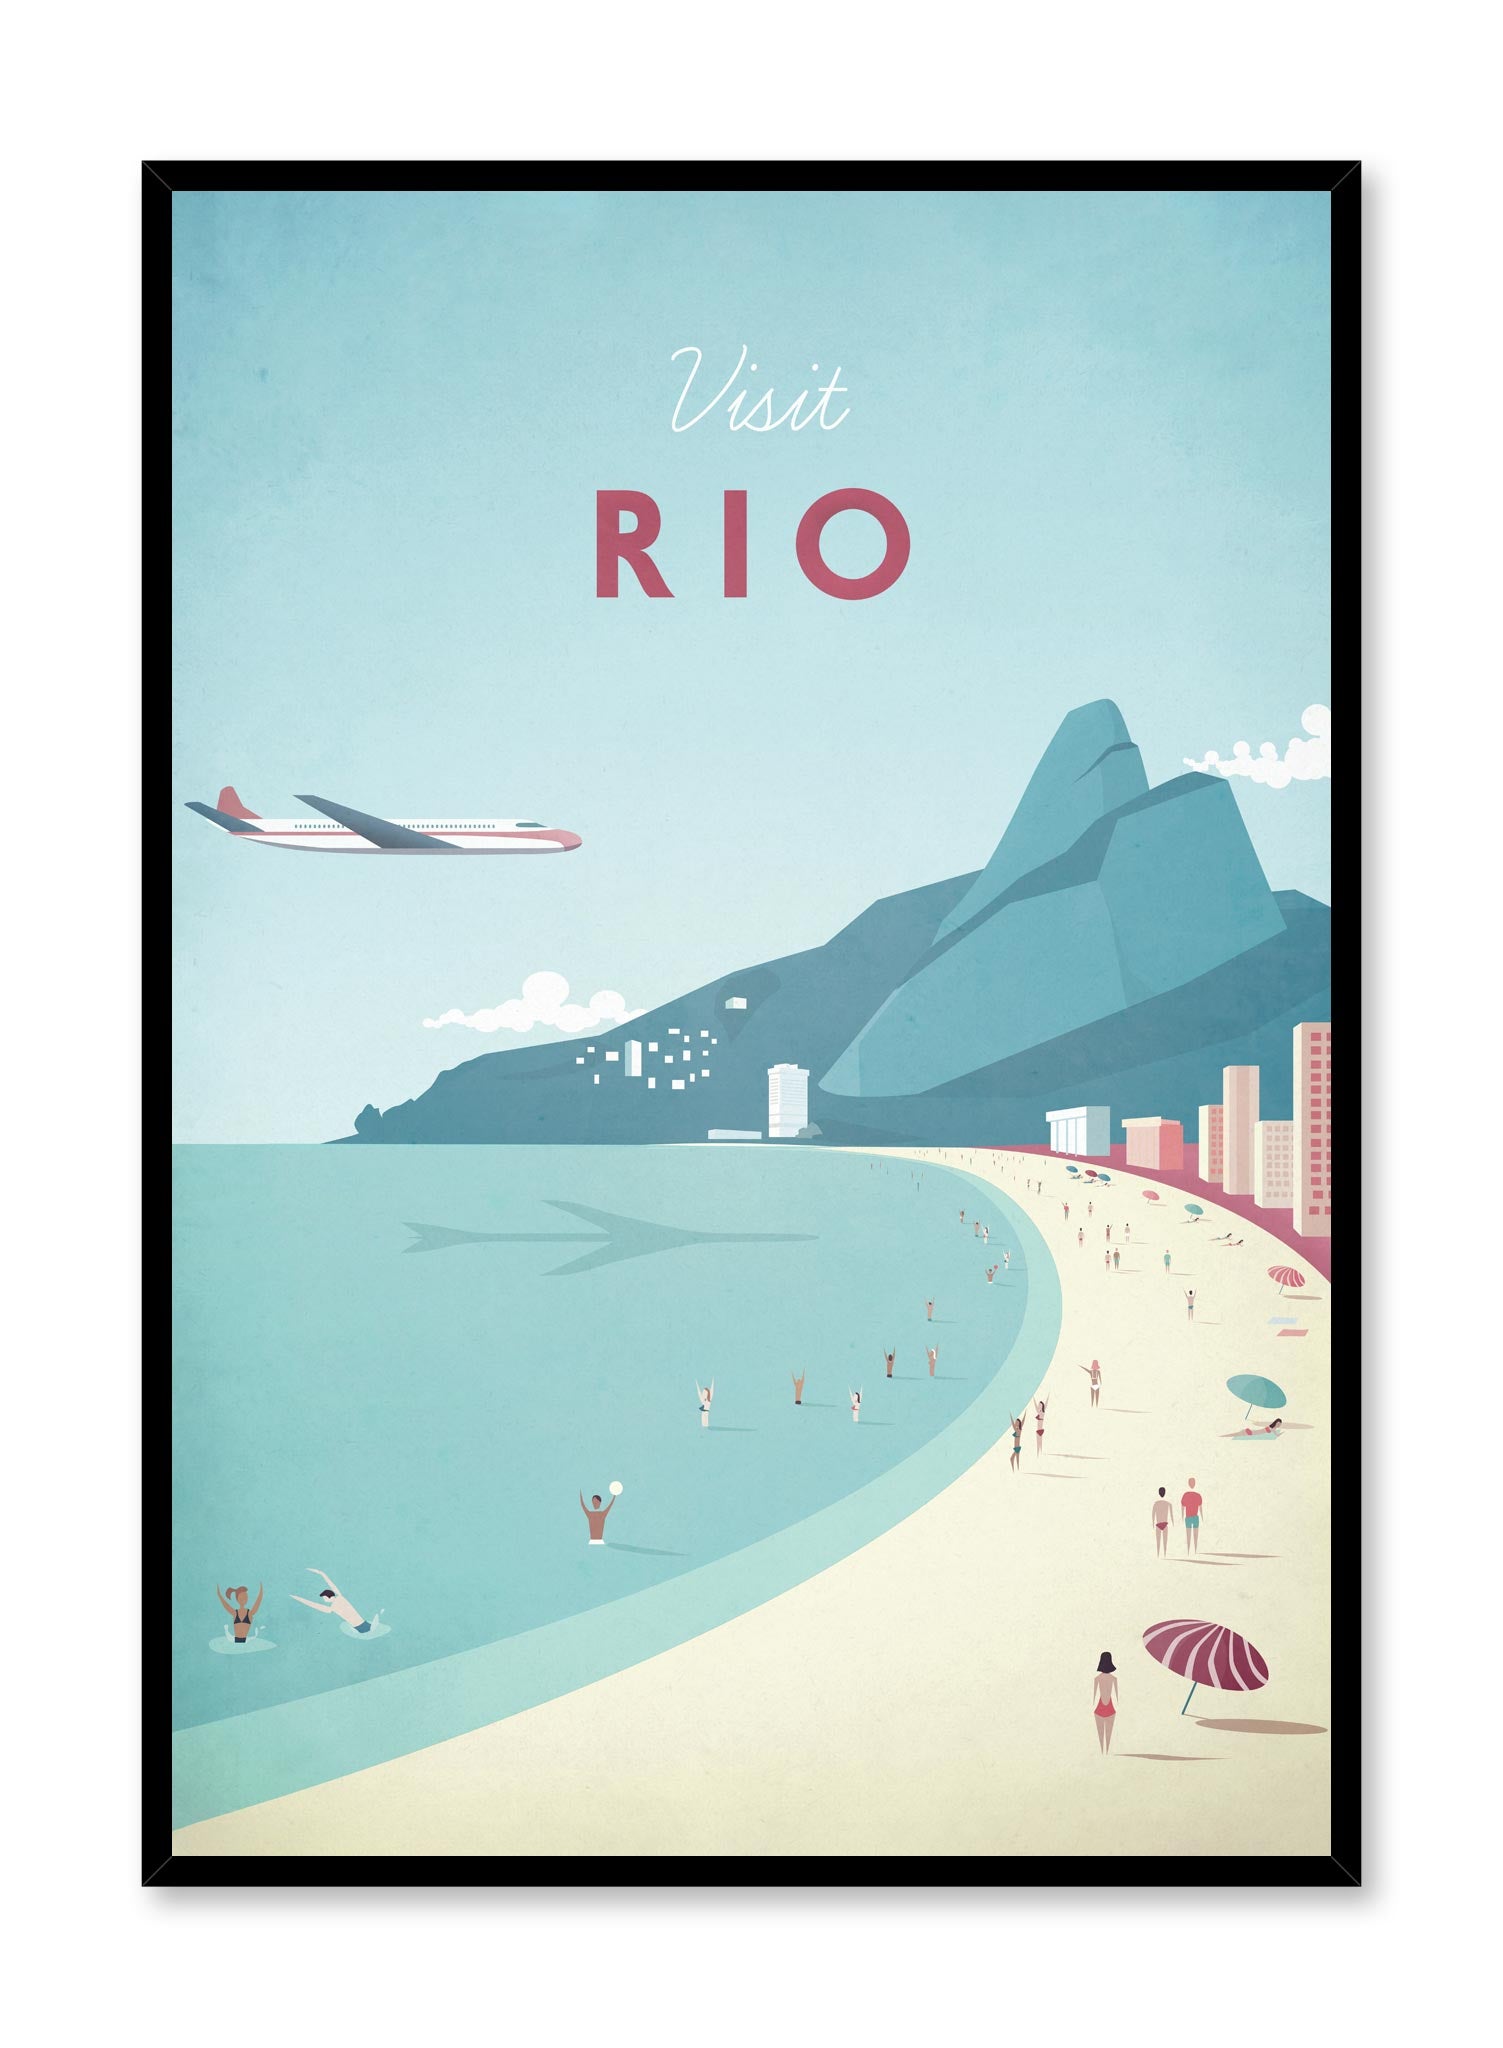 Modern minimalist travel poster by Opposite Wall with illustration of Rio, Brazil